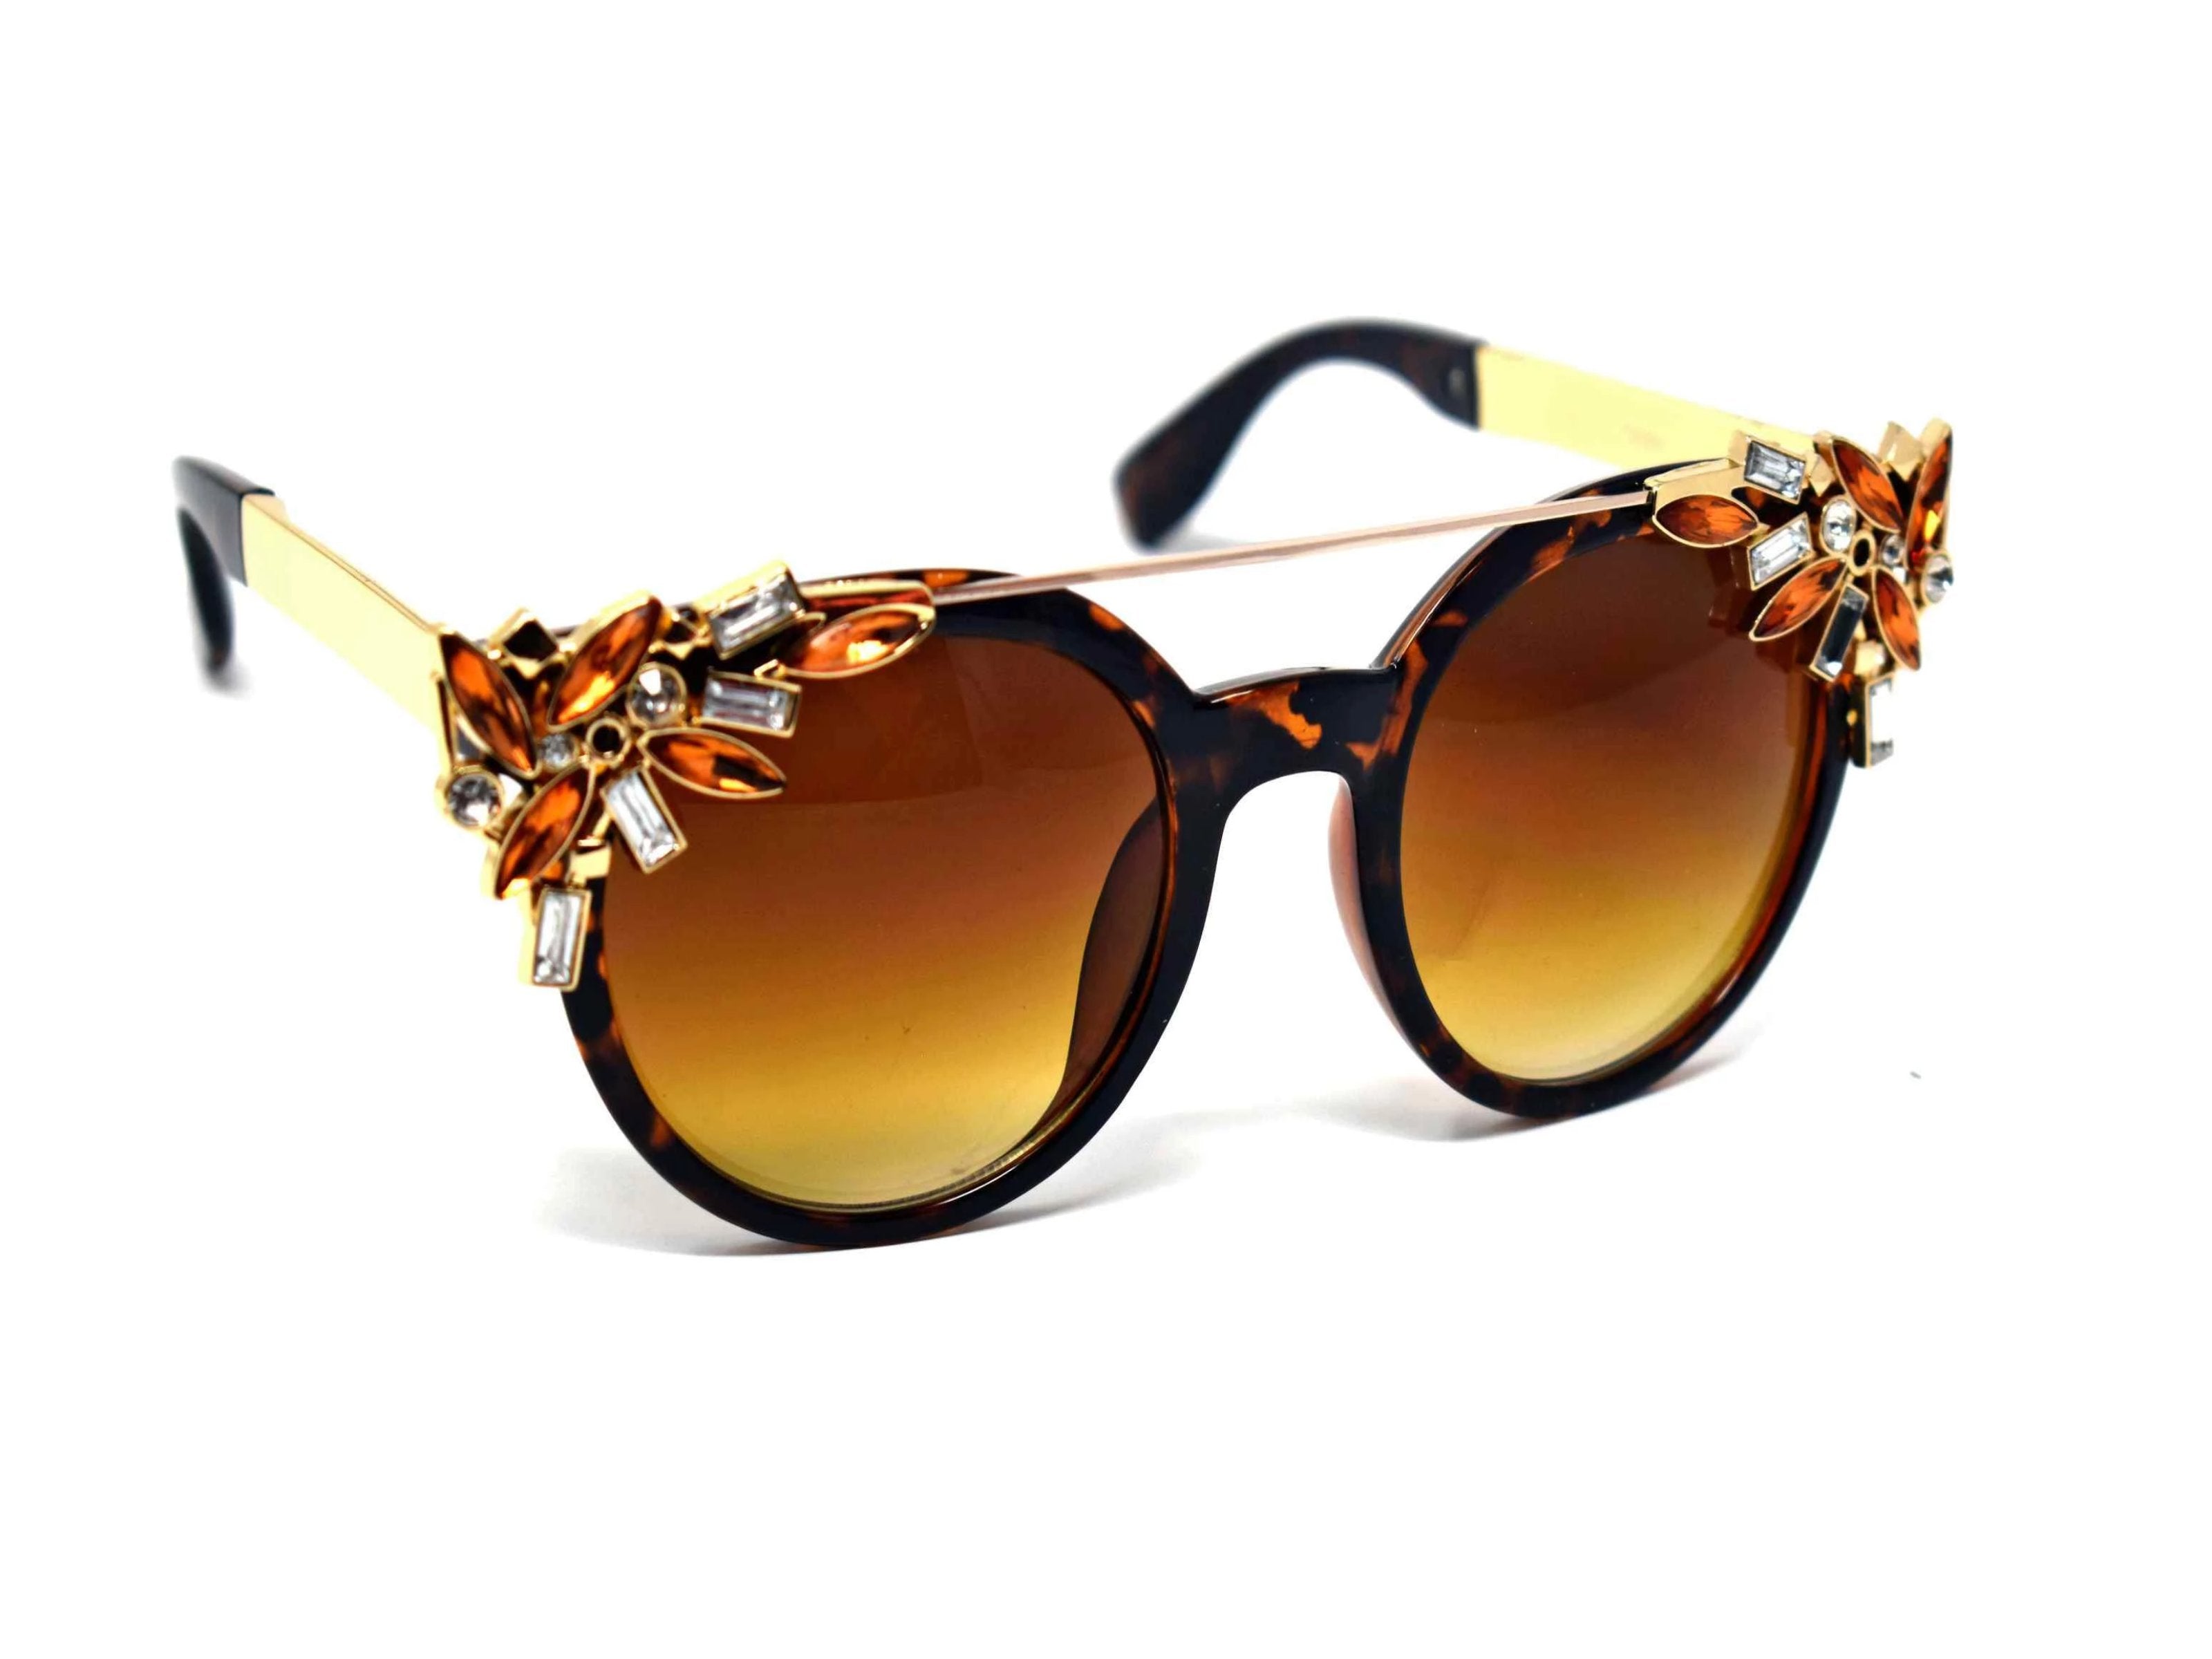 Trend setter and attention getter is what they will call you in these Pansy Leopard sunglasses with a sleek gold trim adorned in clear and brown gems, in a pantos style frame.